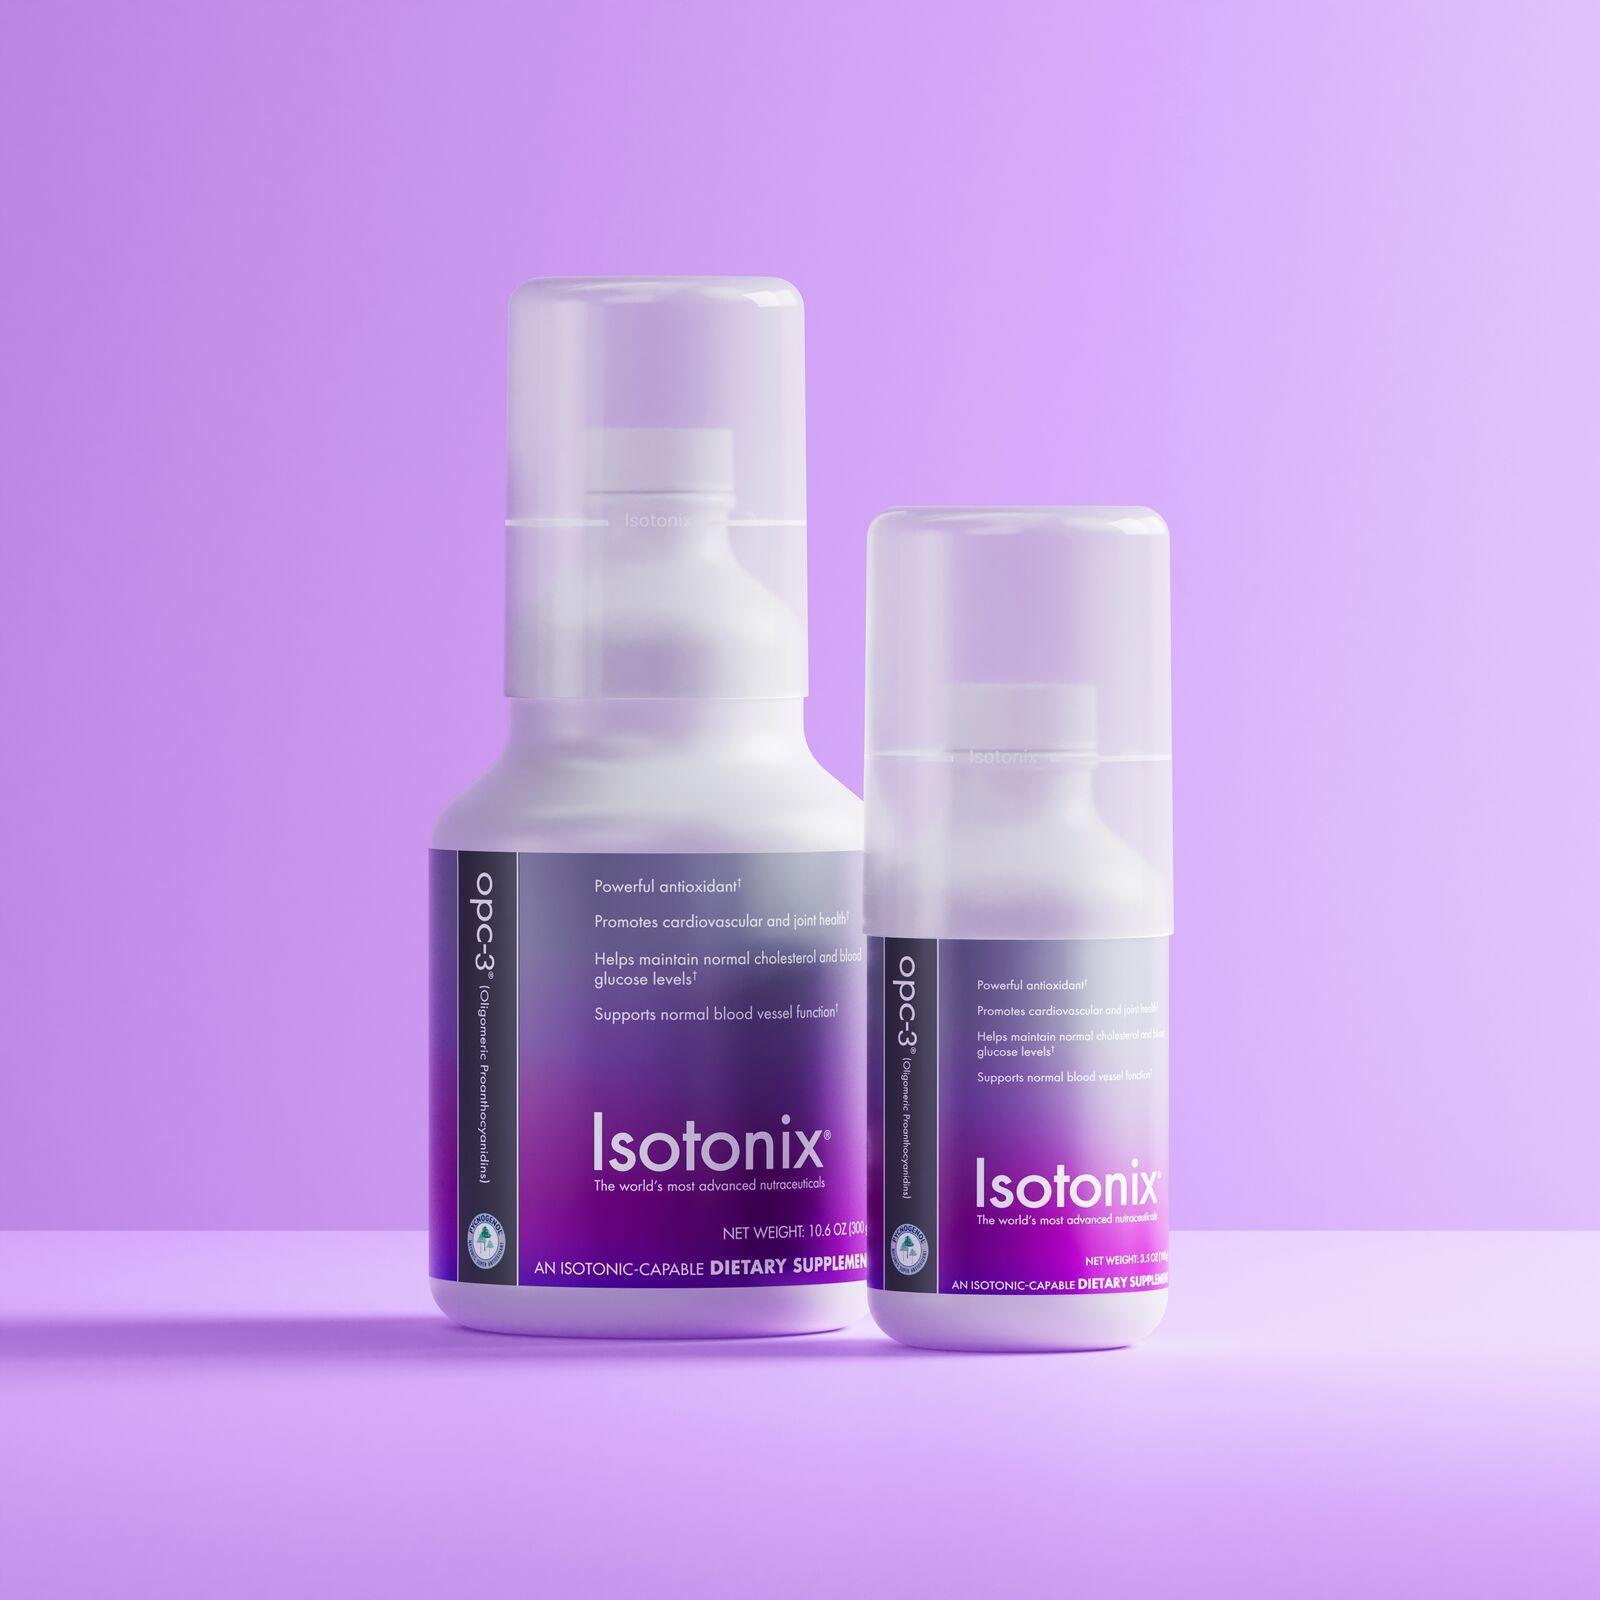 Isotonix OPC-3,Essential, Top 10 Customer Favorite, Vegetarian, Product Tested No Detectable GMO